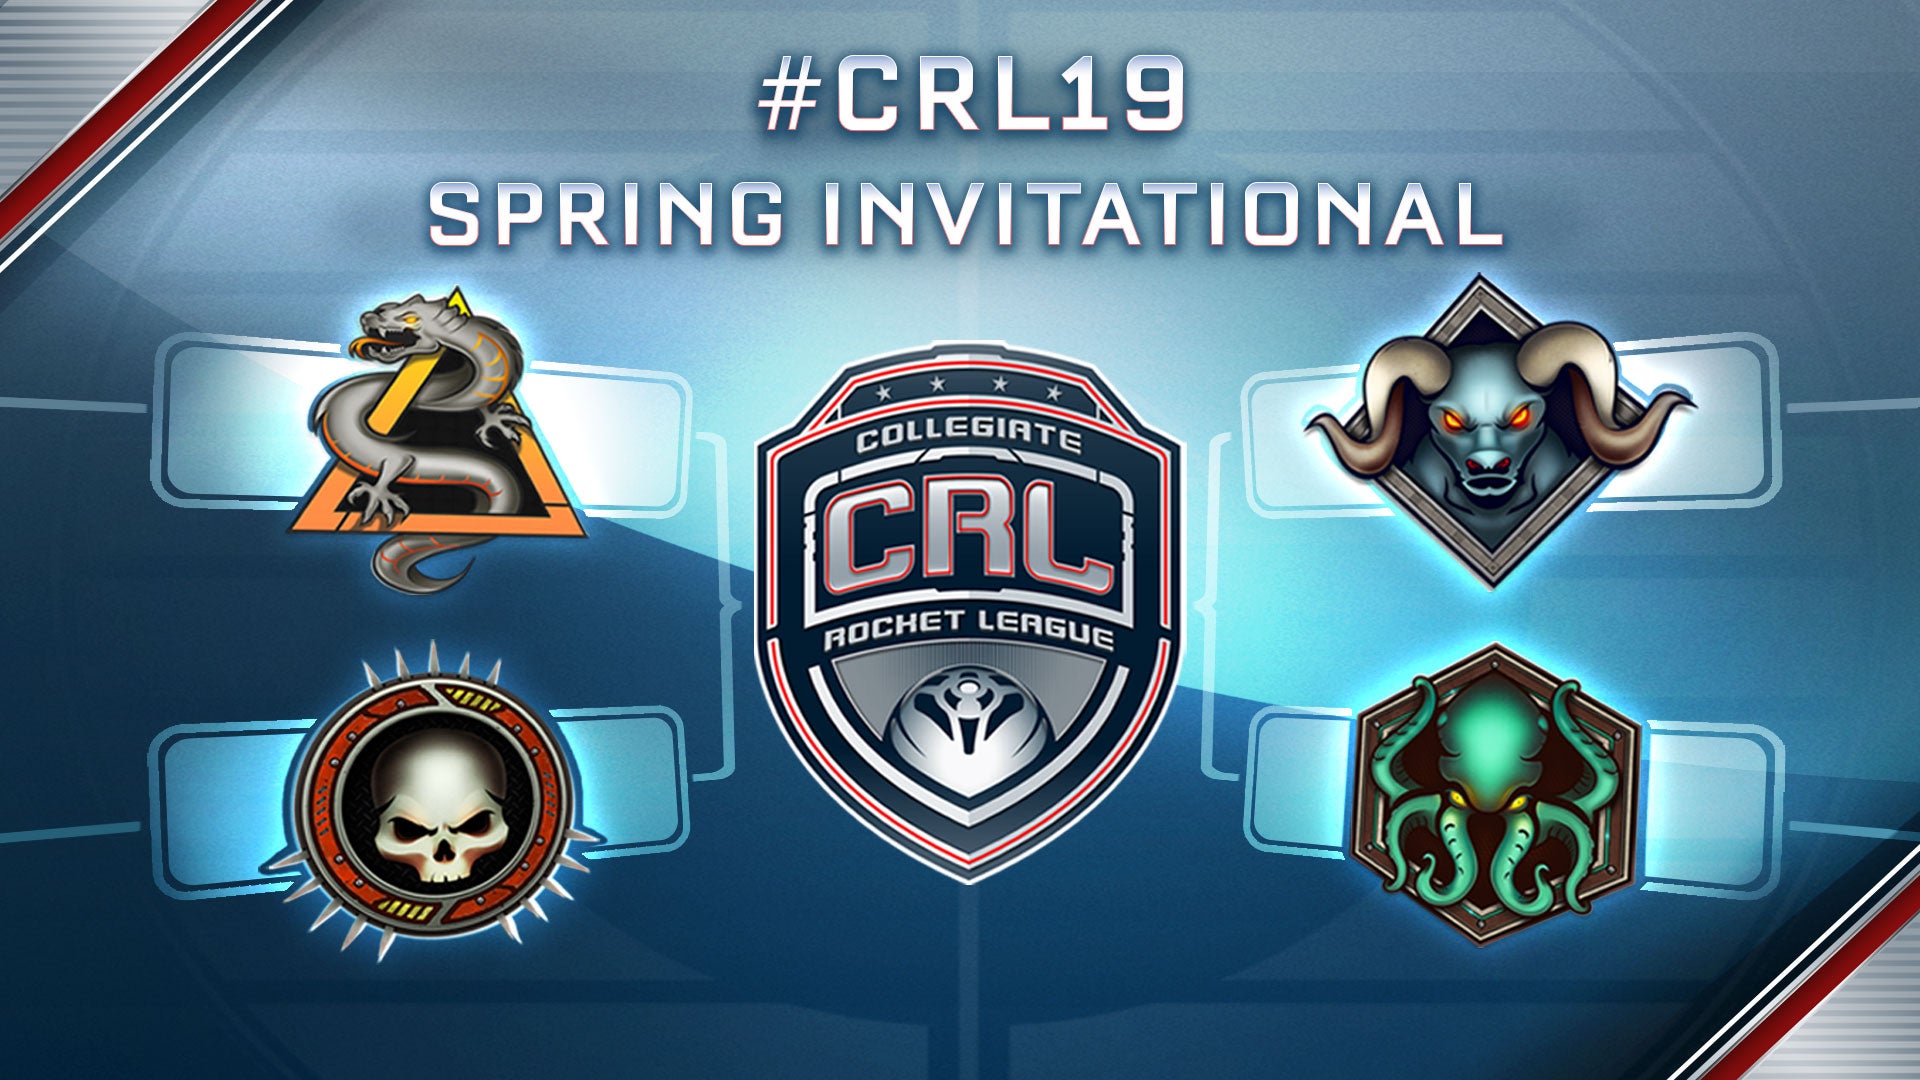 CRL Spring Invitational Coming to NCAA Final Four in Minneapolis  Image